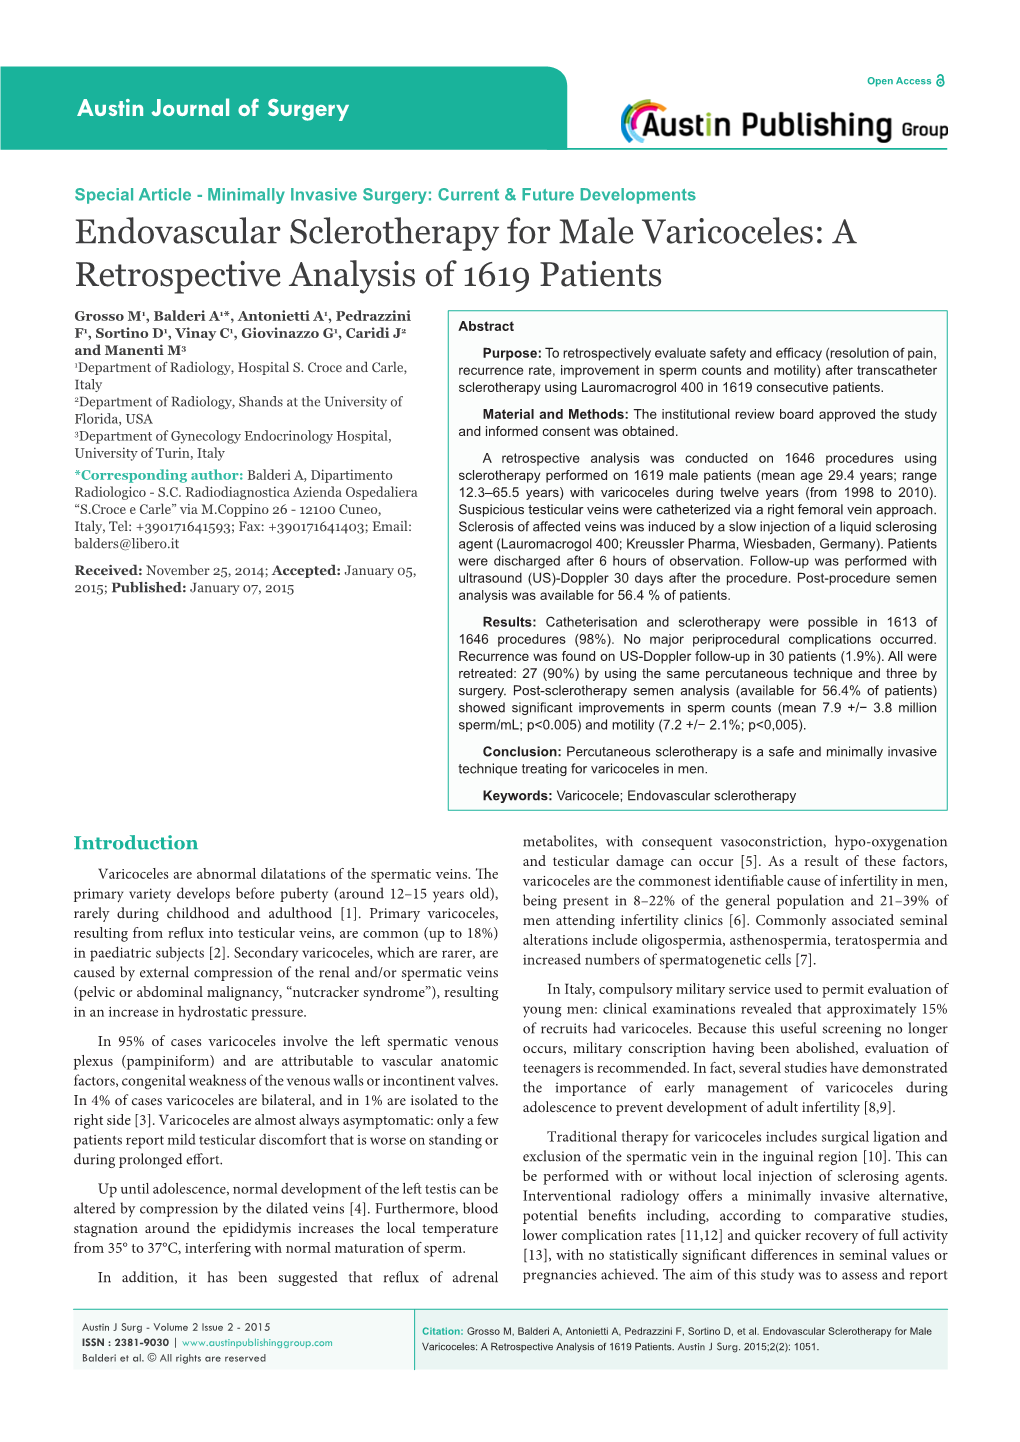 Endovascular Sclerotherapy for Male Varicoceles: a Retrospective Analysis of 1619 Patients